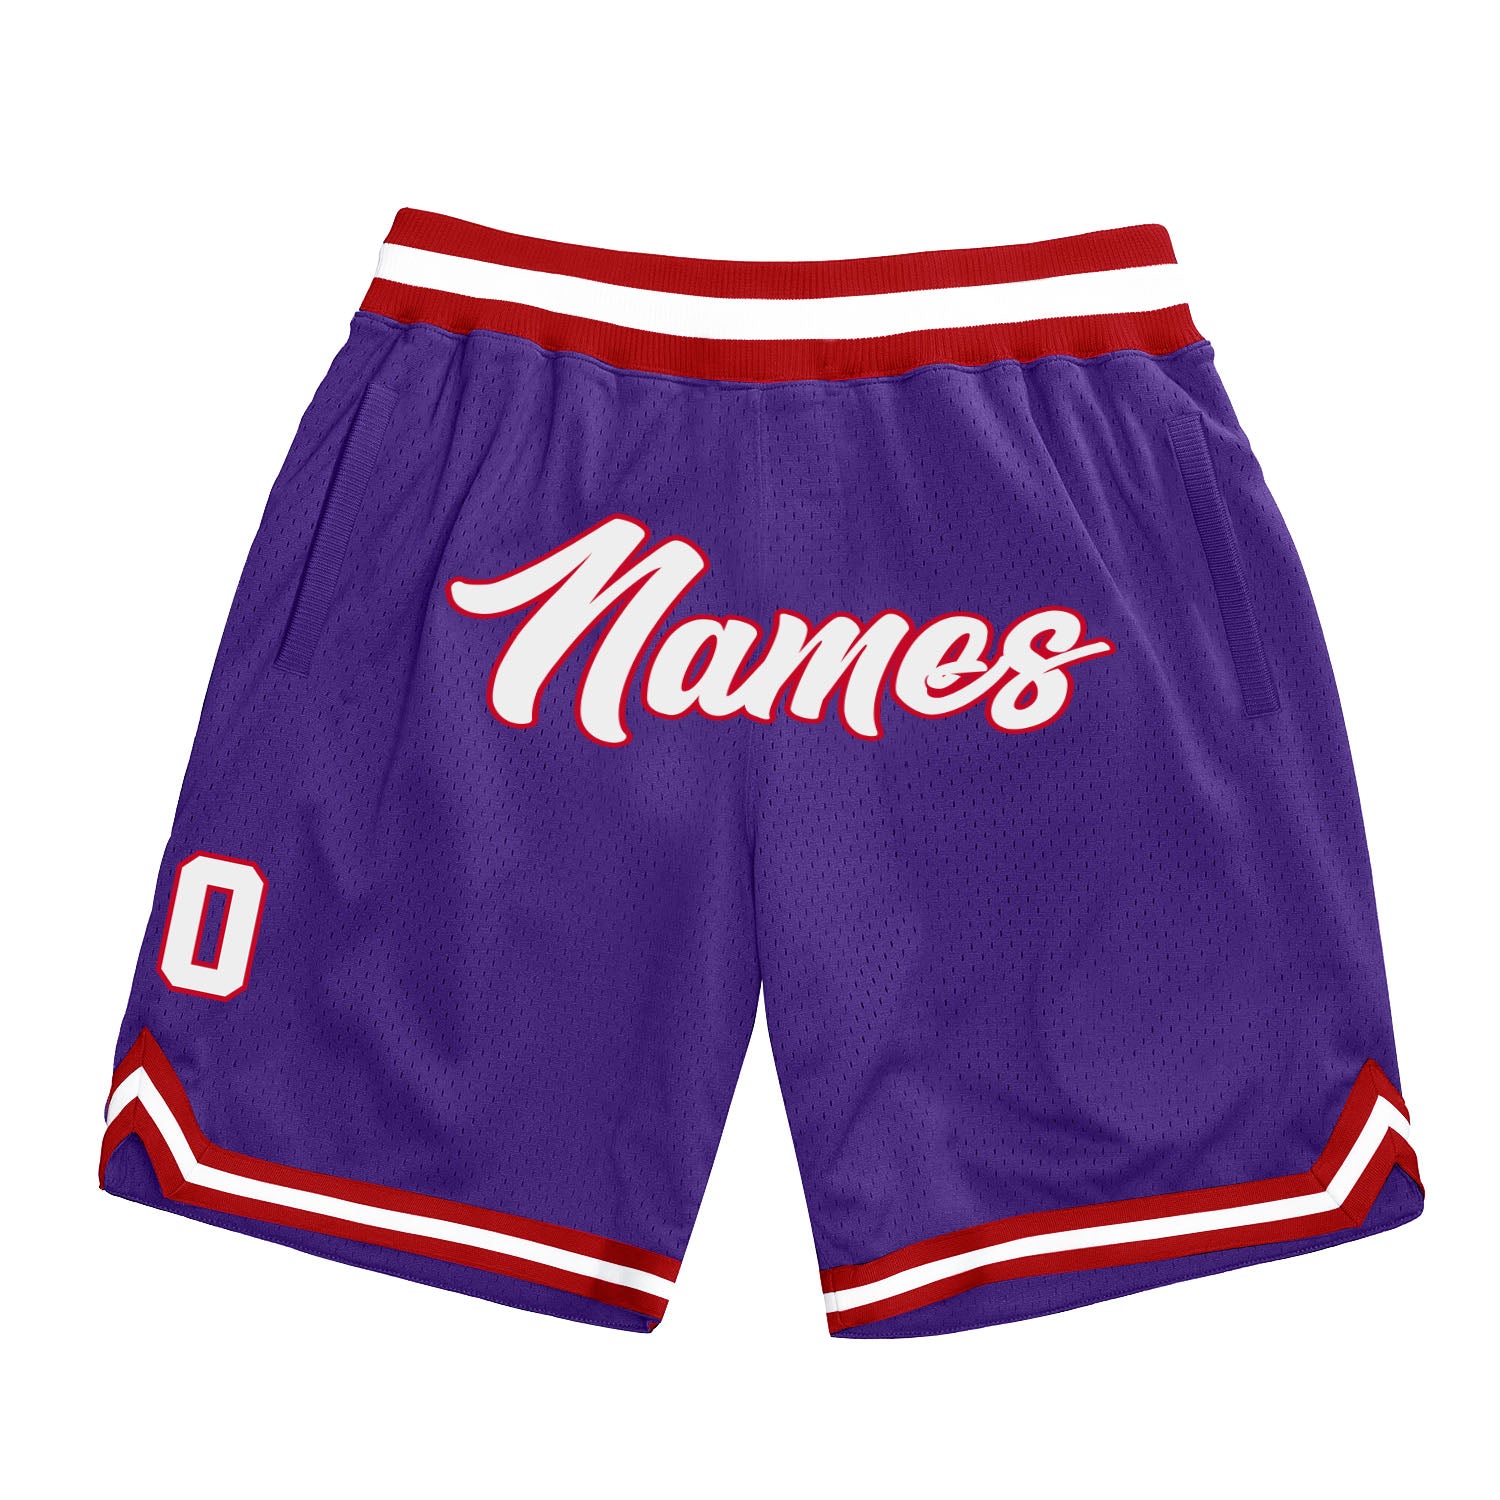 NBA_ 2021 Team Basketball Short Don Co-Branded Sport Shorts Hip Pop Pant  With Pocket Zipper Sweatpants Purple White Black Red Blue Mens Stitched''nba ''jersey 